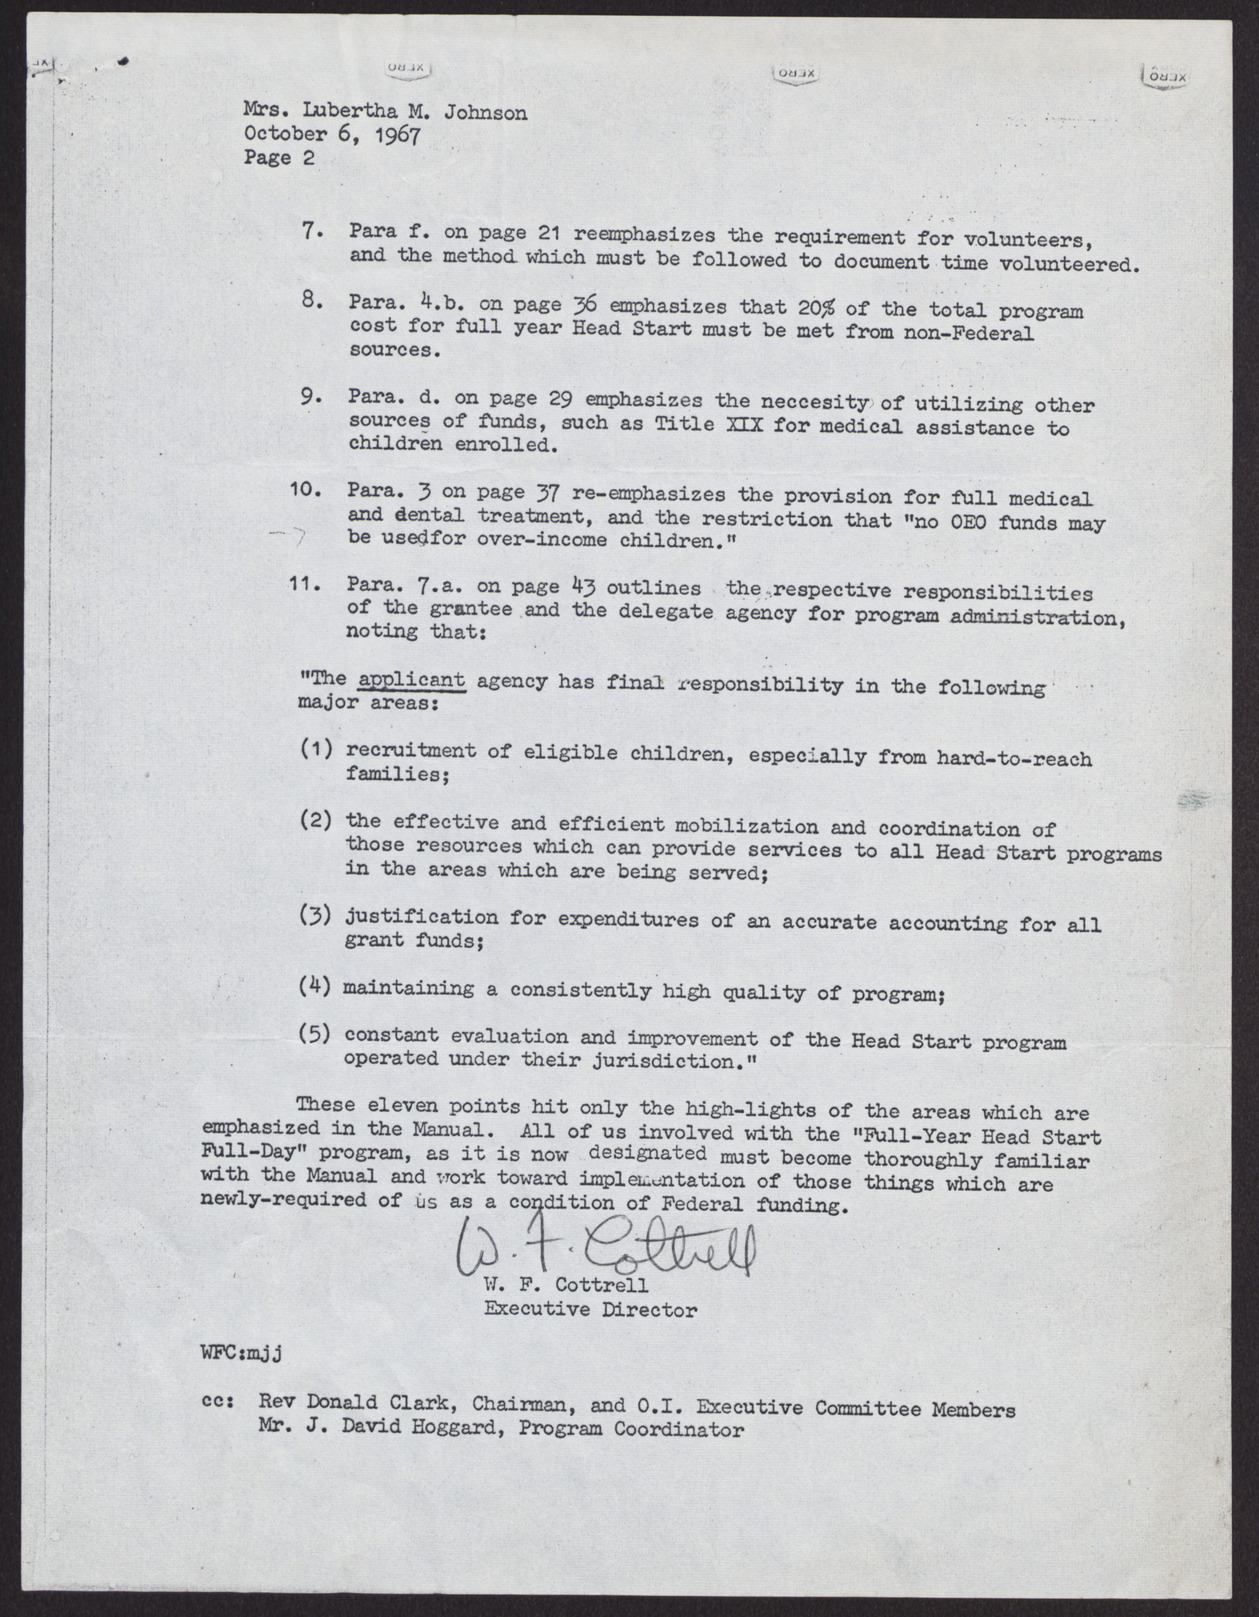 Letter to Mrs. Lubertha M. Johnson from W. F. Cottrell (2 pages), October 6, 1967, page 2